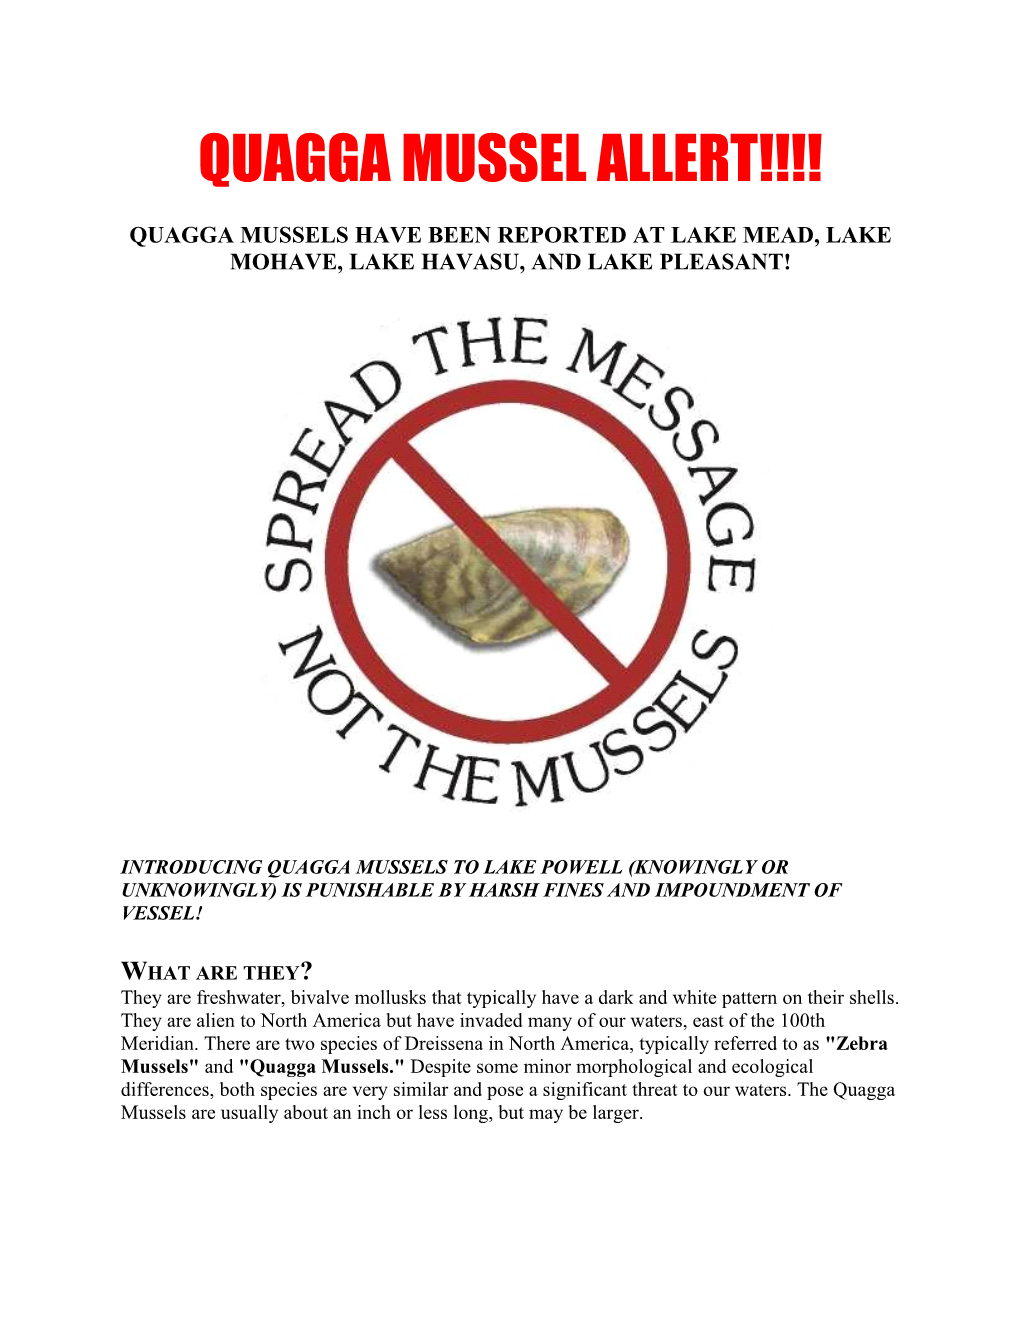 Quagga Mussels Have Been Reported at Lake Mead, Lake Mohave, Lake Havasu, and Lake Pleasant!